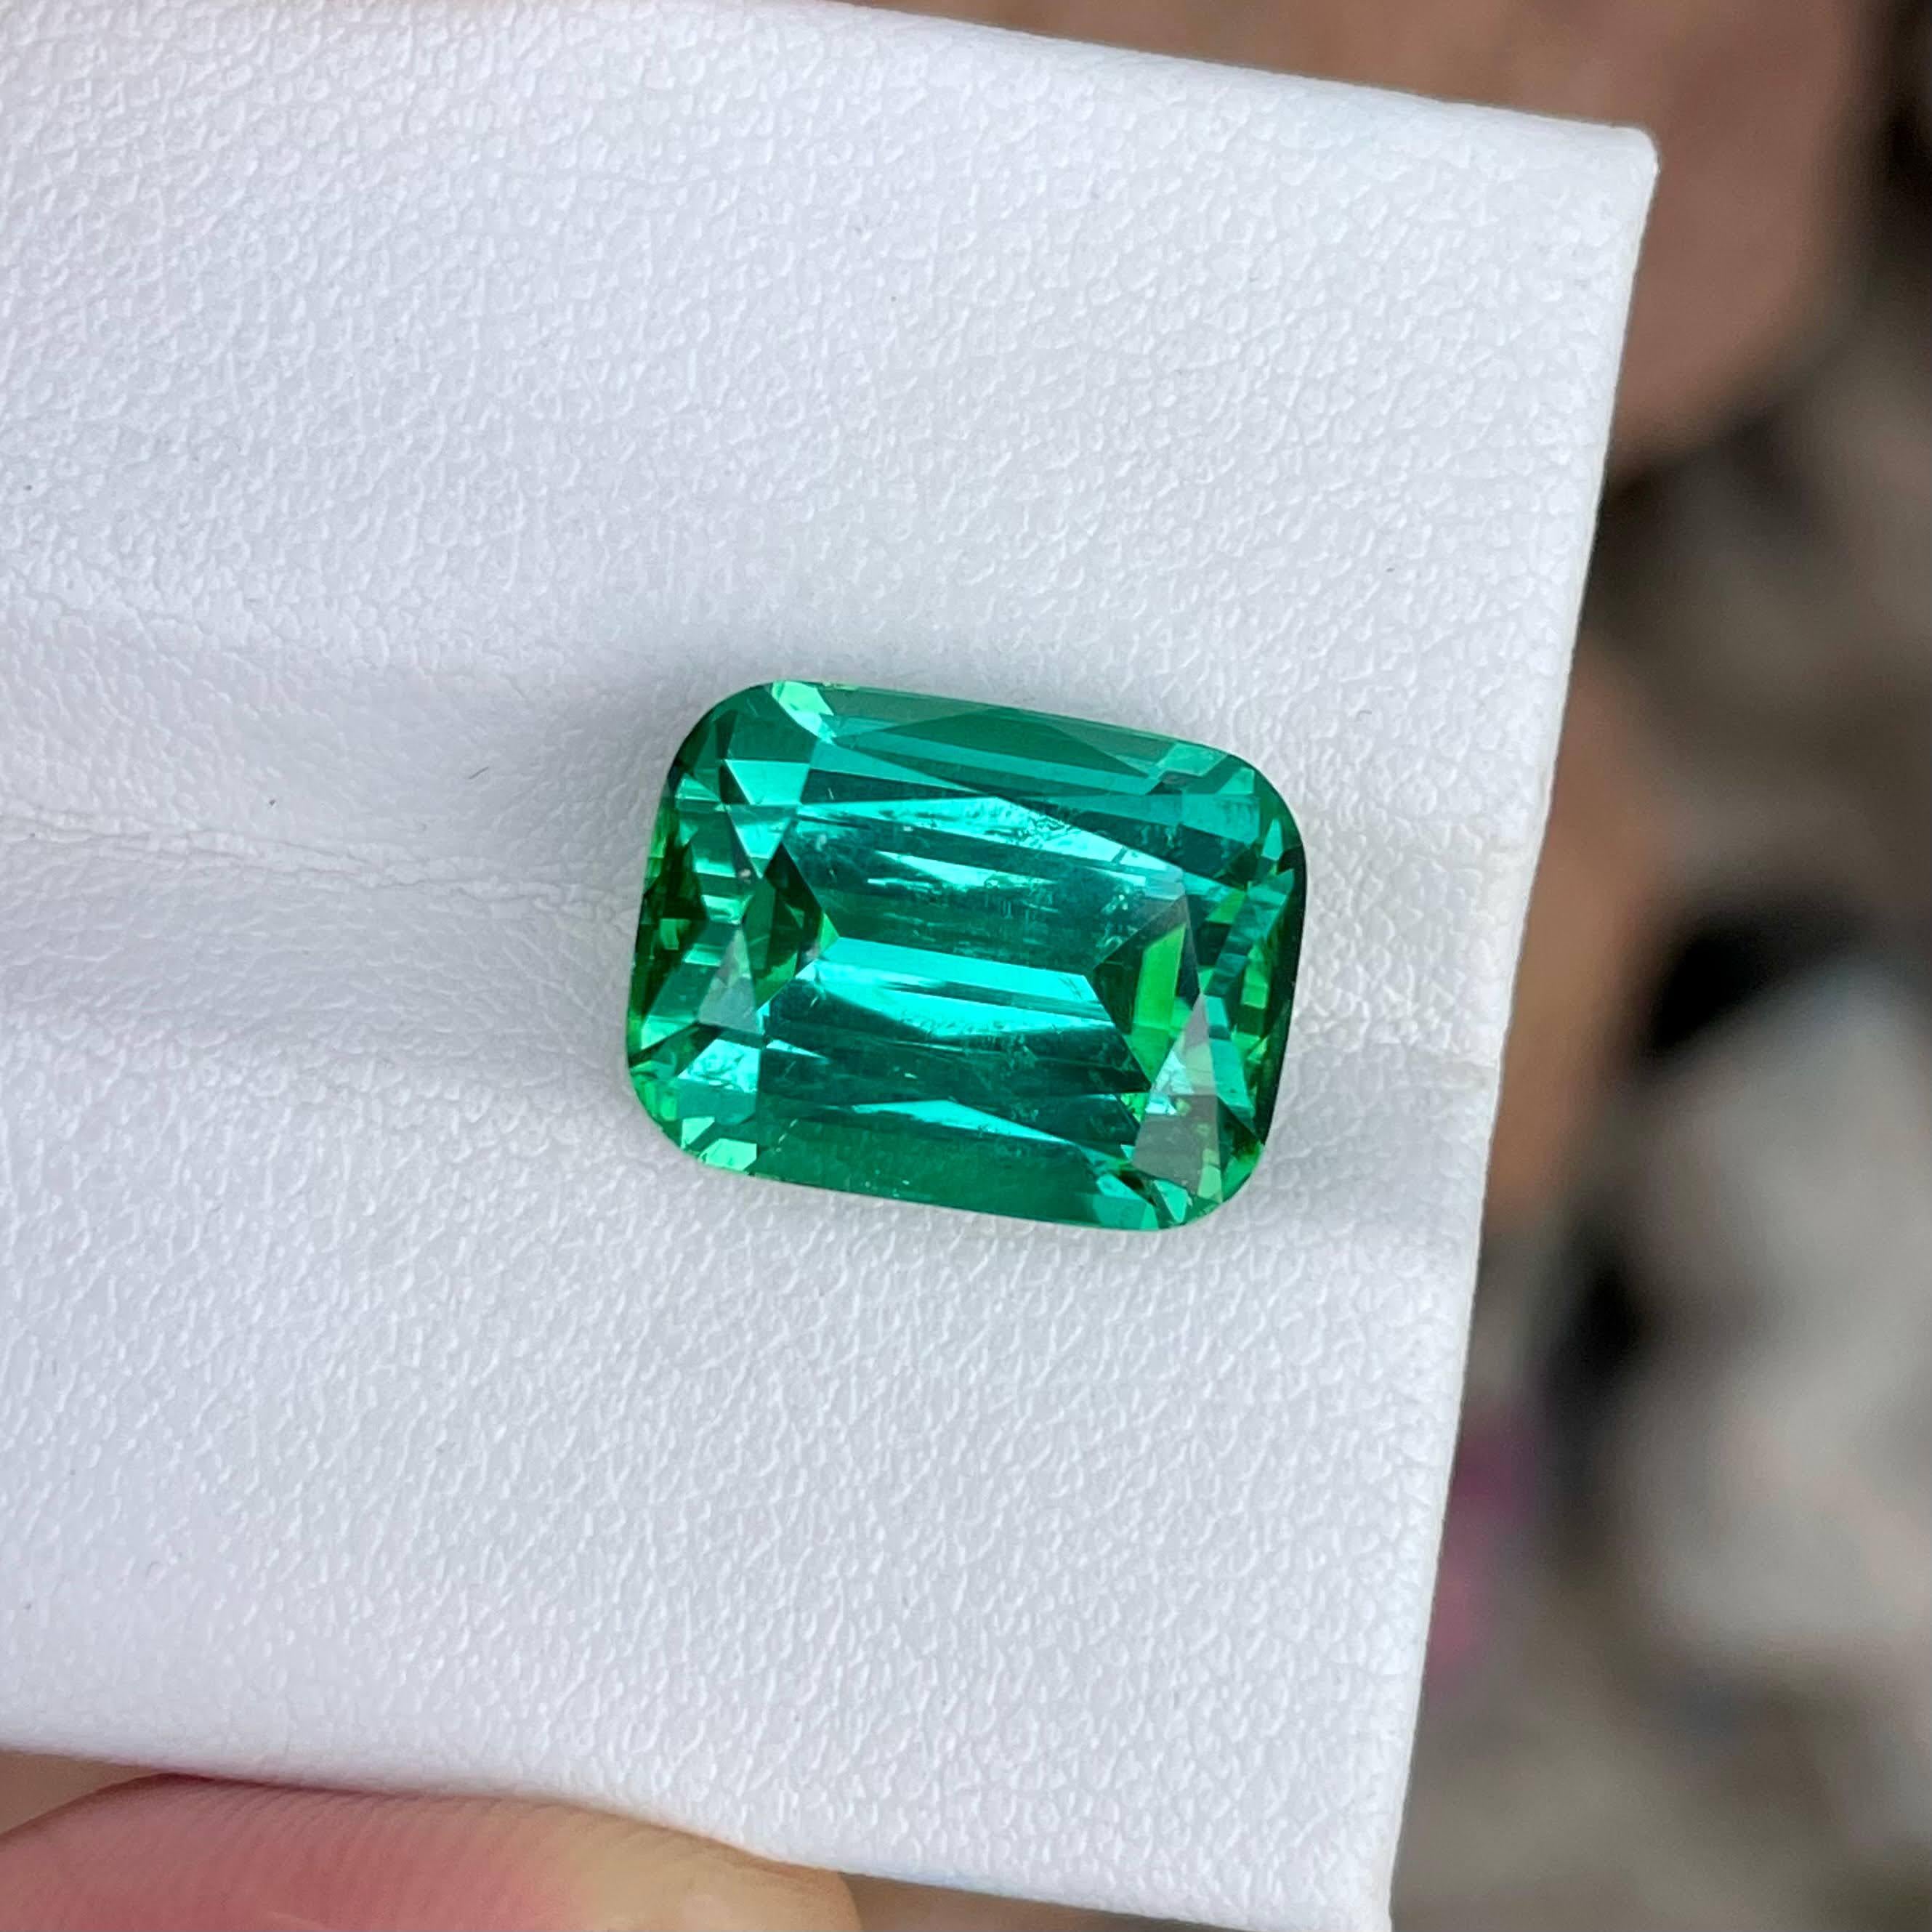 Weight 12.60 carats 
Dimensions 14.4x11.0x9.5 mm
Treatment none 
Origin Afghanistan 
Clarity SI (Slightly Included)
Shape cushion 
Cut fancy cushion 




The exquisite beauty of a 12.60 carats Greenish Blue Tourmaline Stone takes center stage in